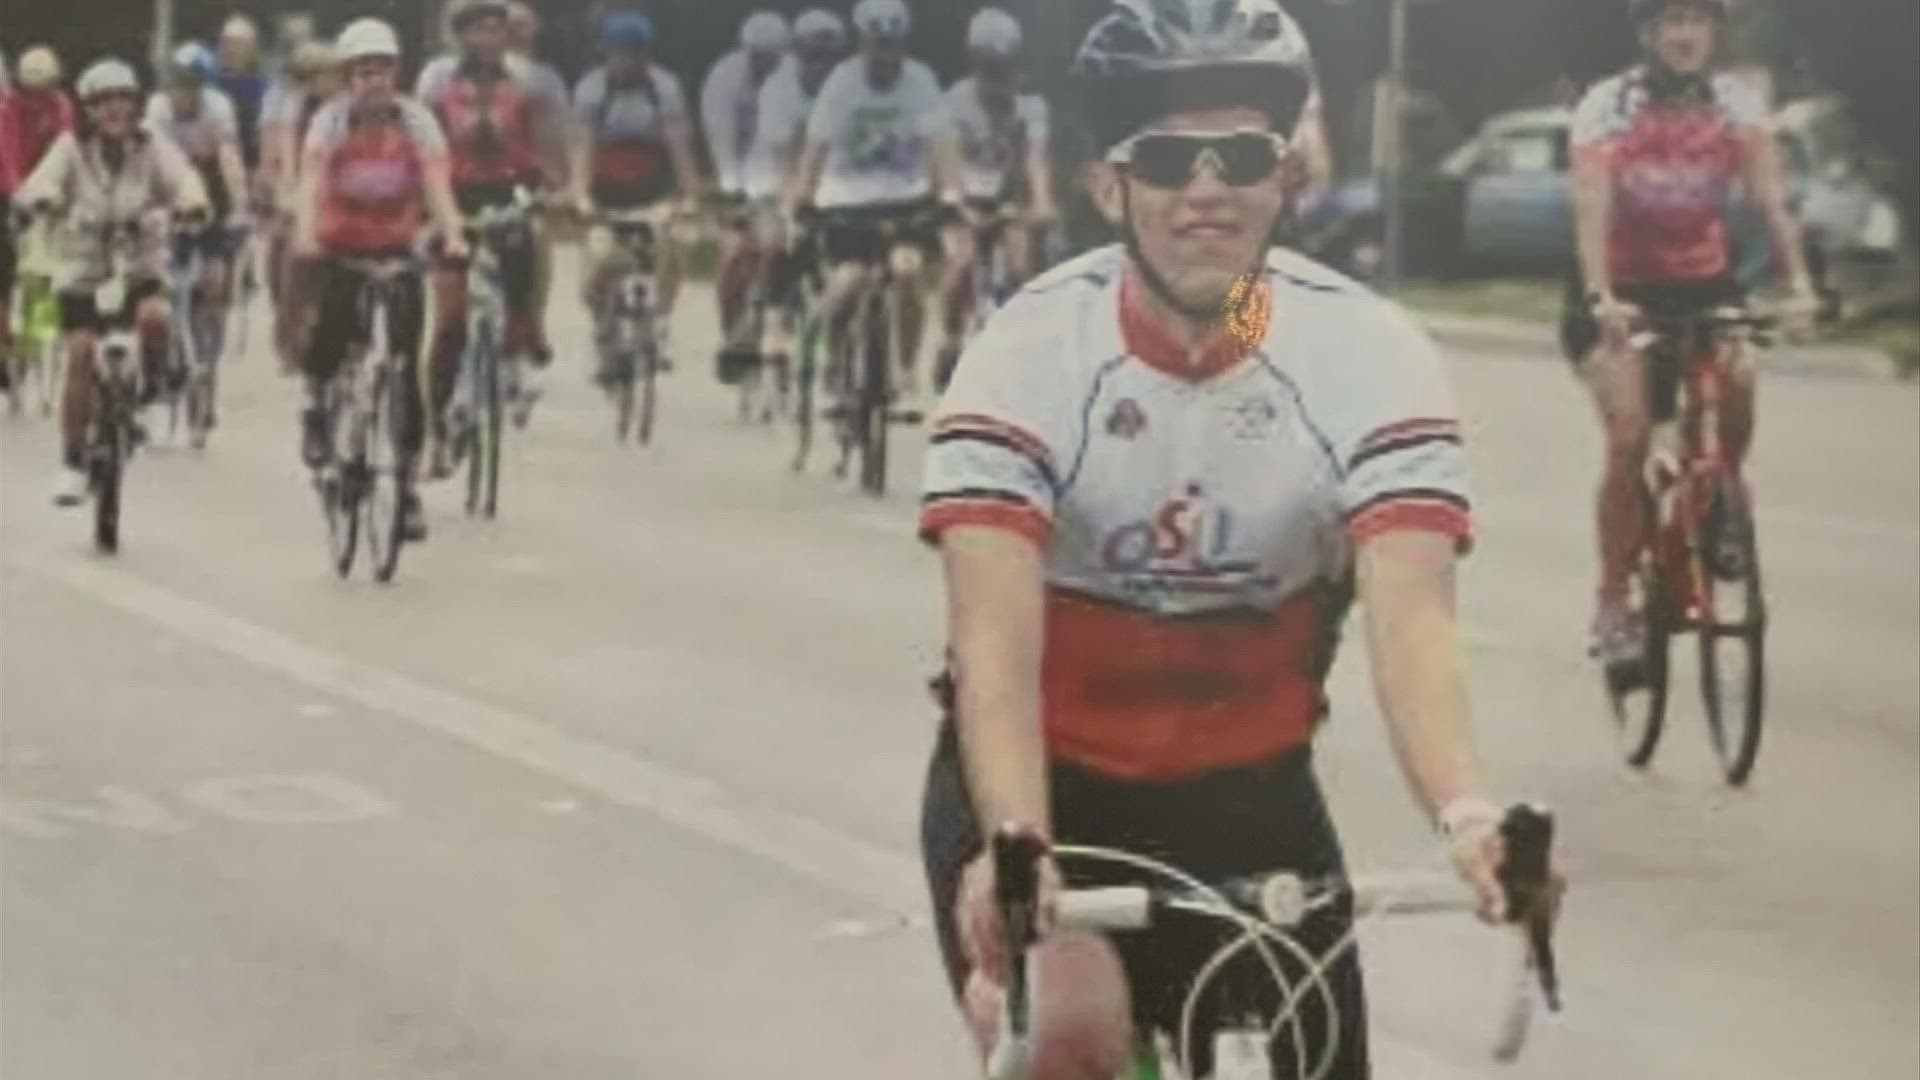 Mason Fisher, who was a three-time rider and active member of the community, passed away while participating in the 102-mile ride on Saturday.